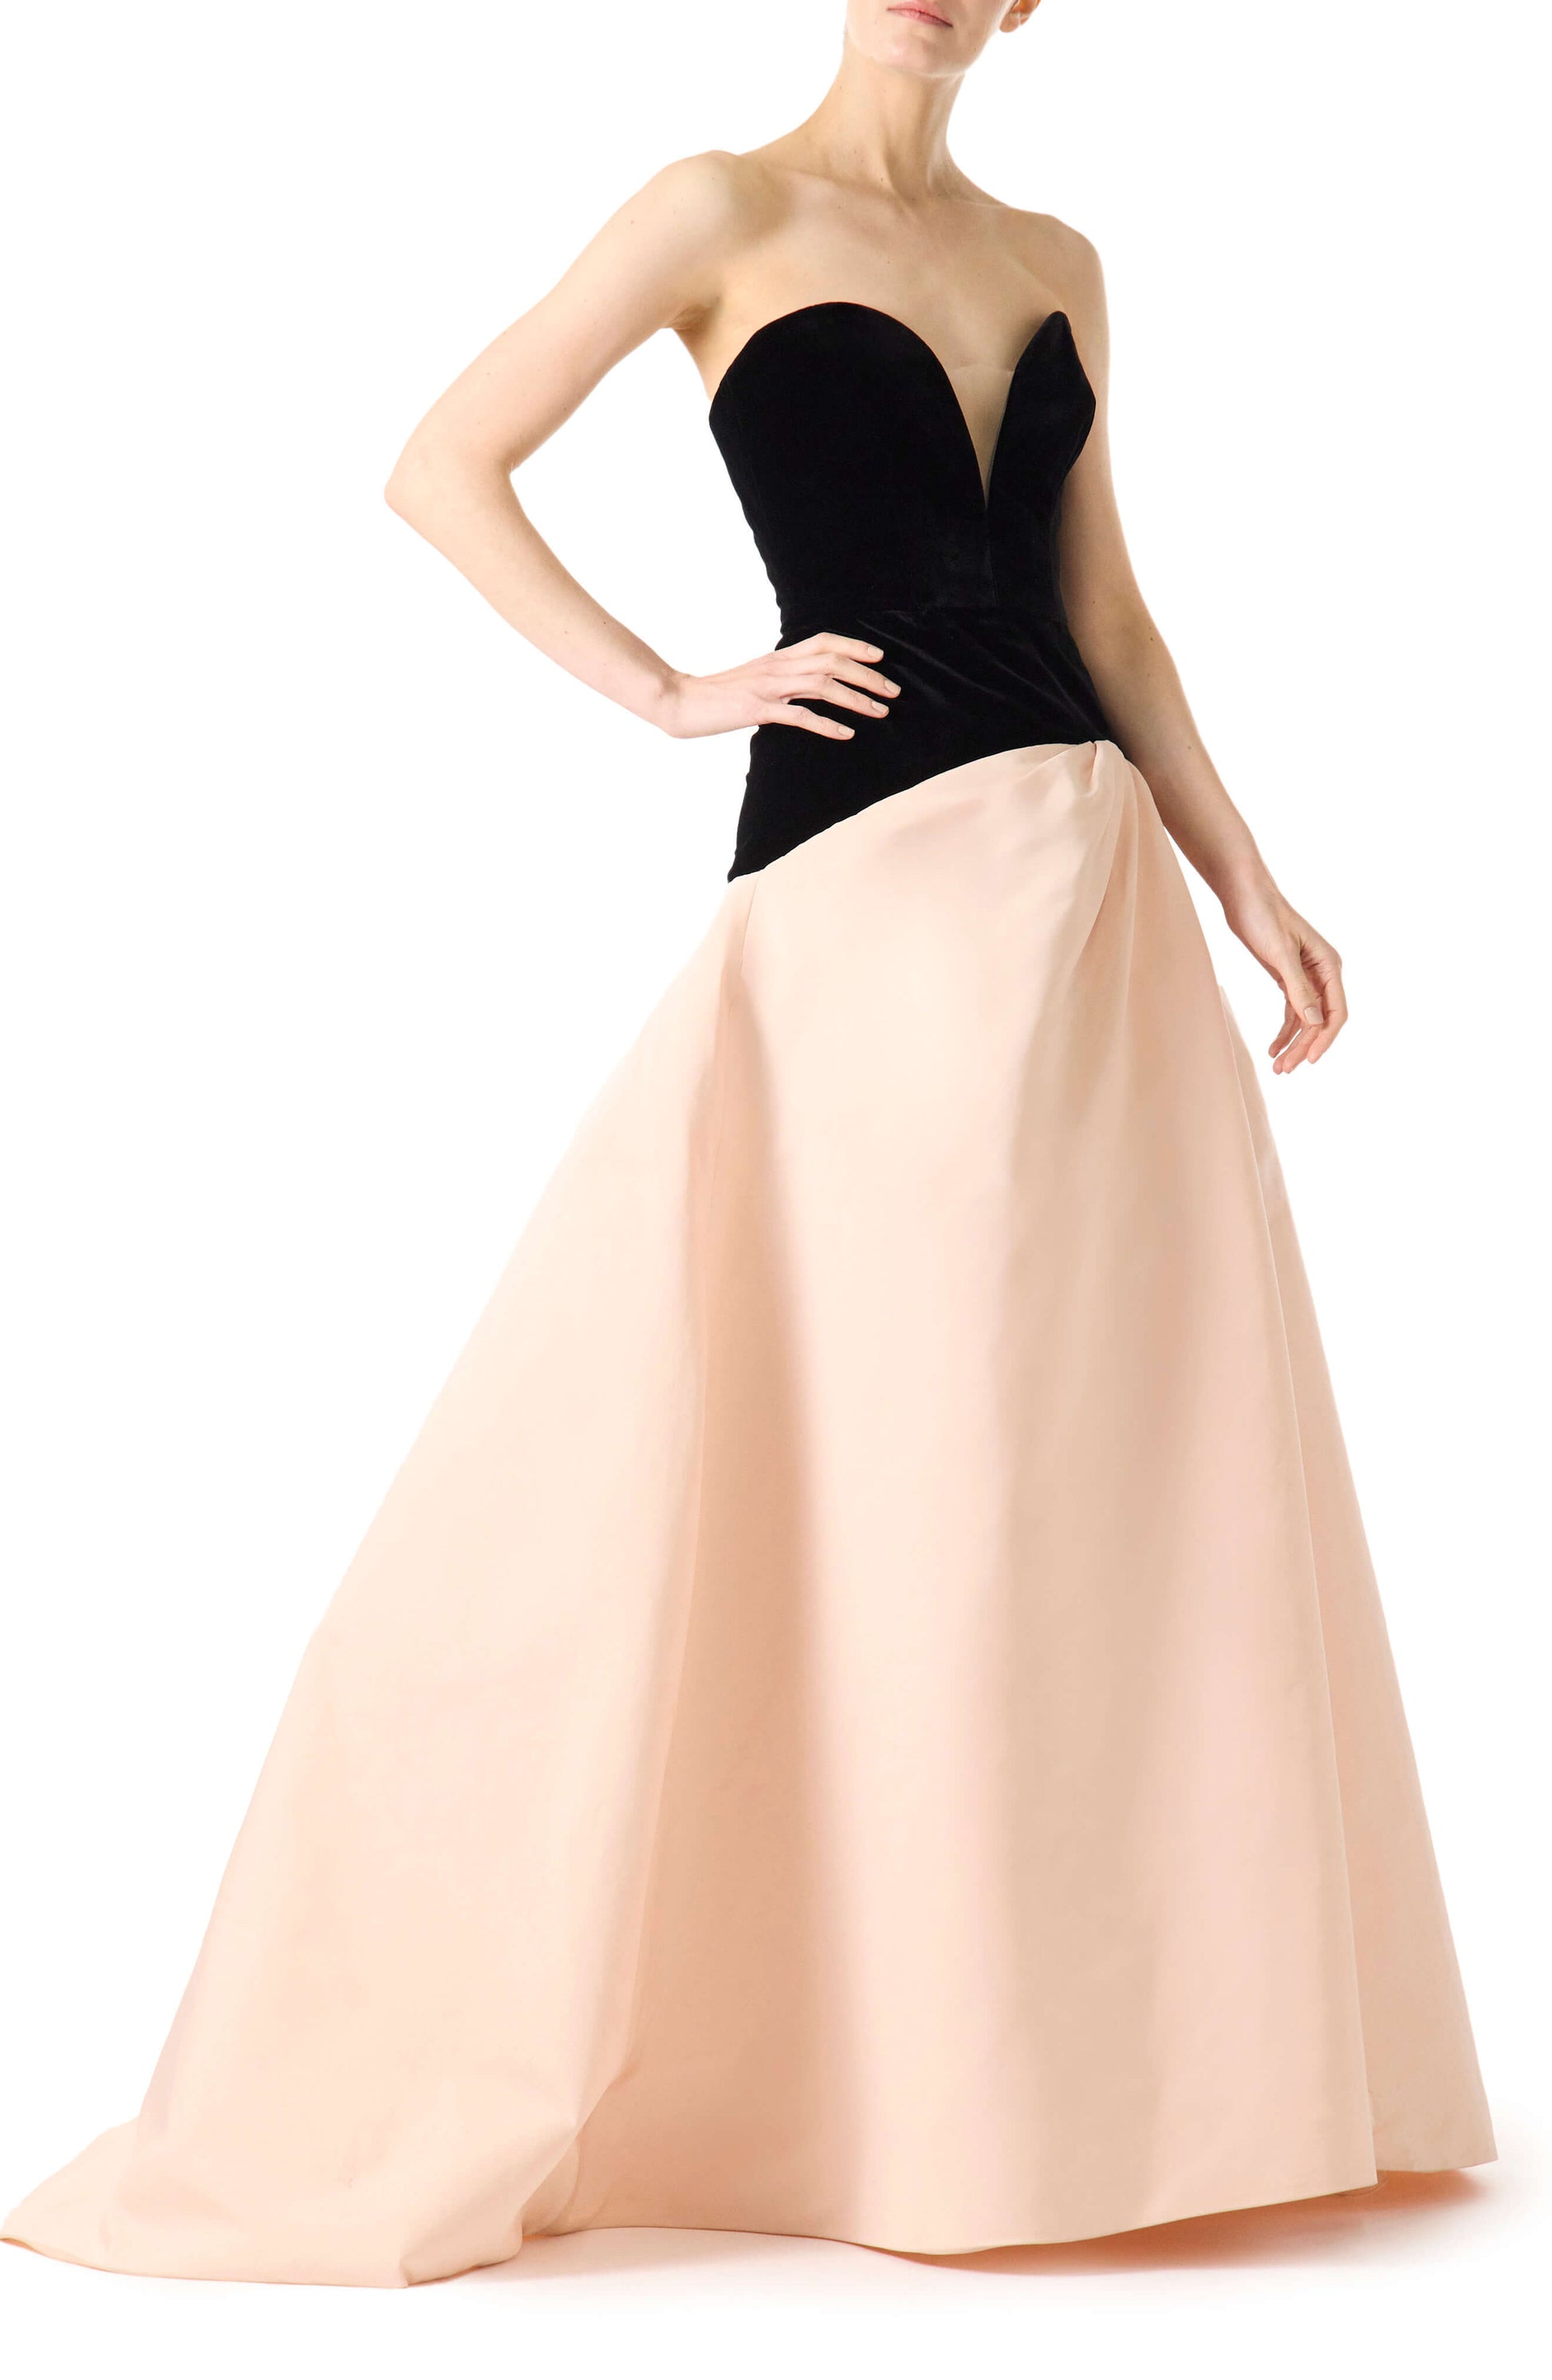 Monique Lhuillier pale blush and noir strapless ballgown with sweetheart neckline, drop waist and high slit in skirt.  